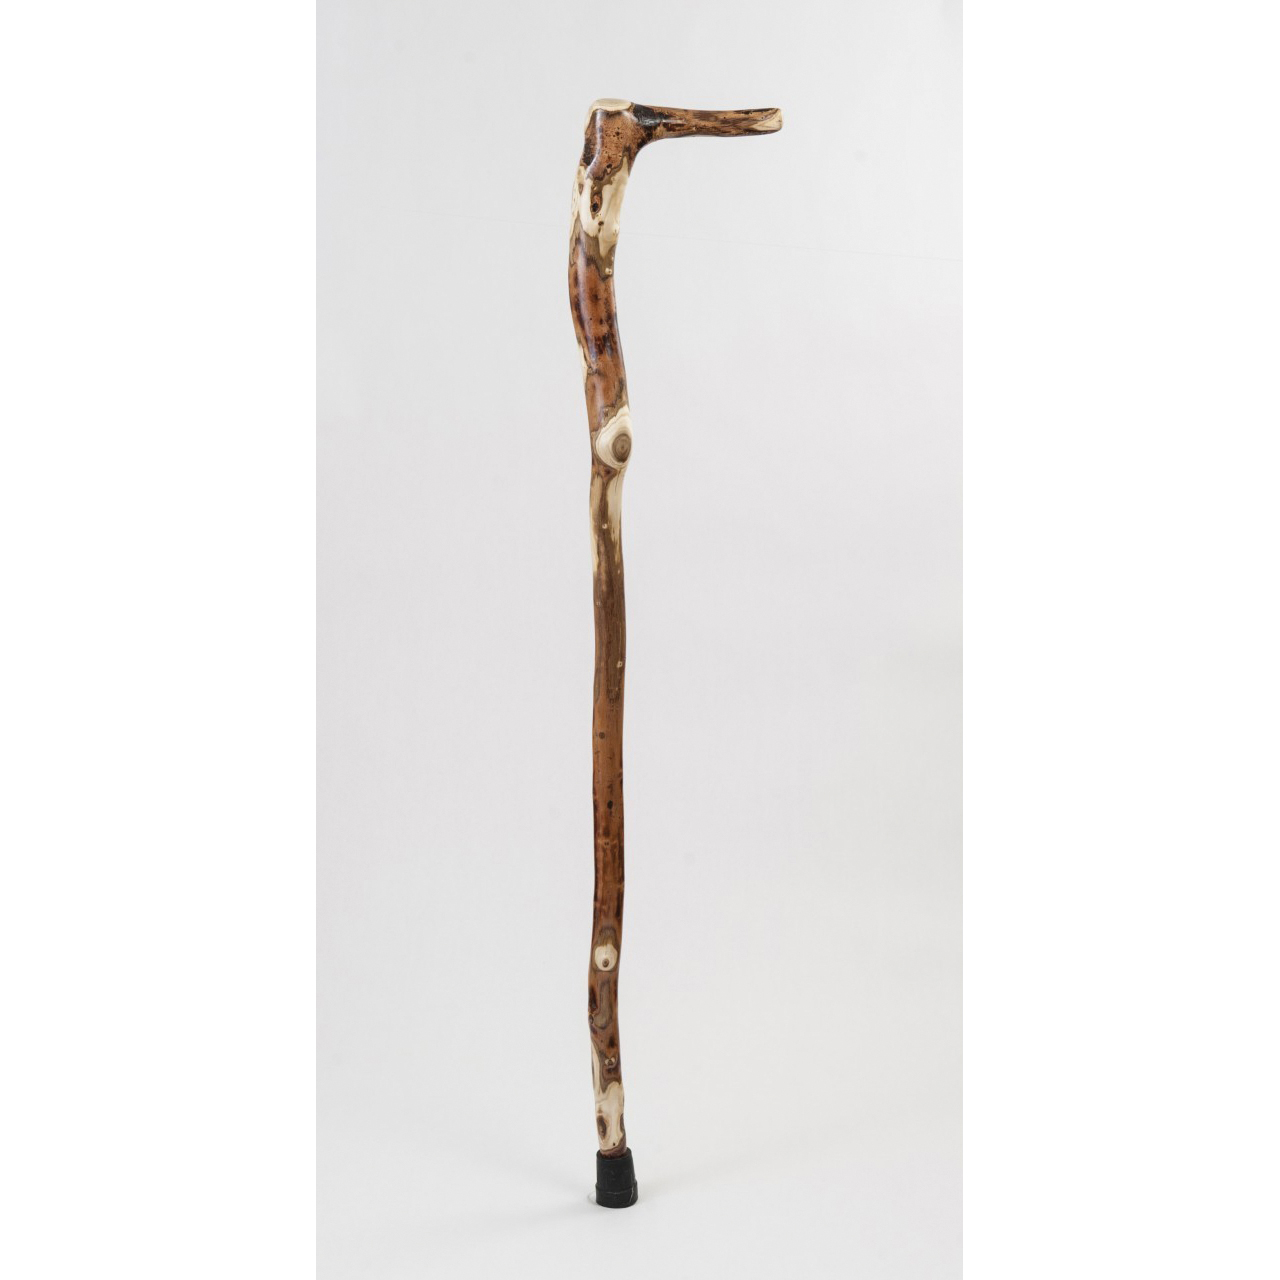 Brazos 502-3000-0138 Rustic Root Cane, 37 in H Cane, Standard Handle, Wood Handle, Hardwood, Root, Lacquer - 1